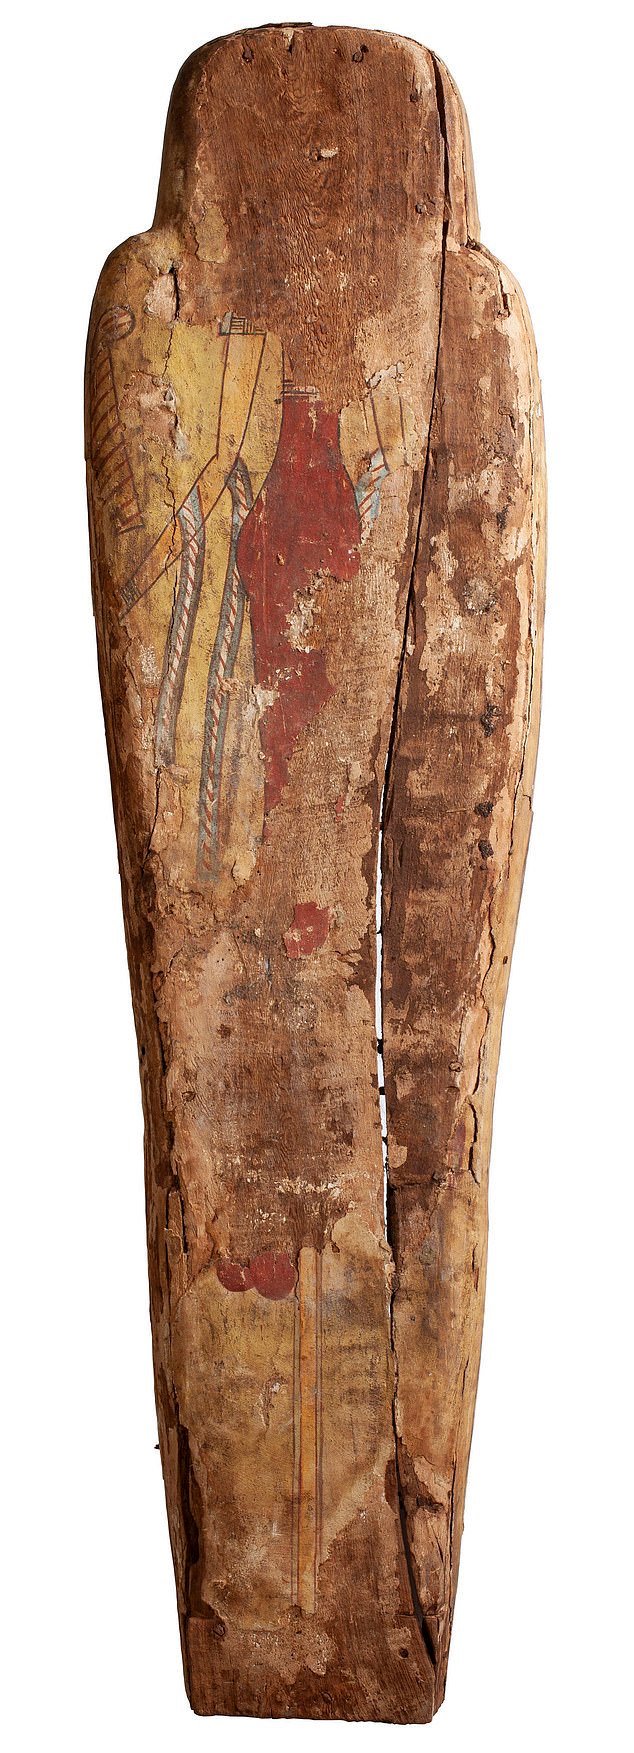 Conservators have discovered previously unknown paintings inside the Egyptian mummy Ta-Kr-Hb, from the collection of the Perth Museum and Art Gallery, Scotland. Photo courtesy of the Perth Museum and Art Gallery, Scotland. 